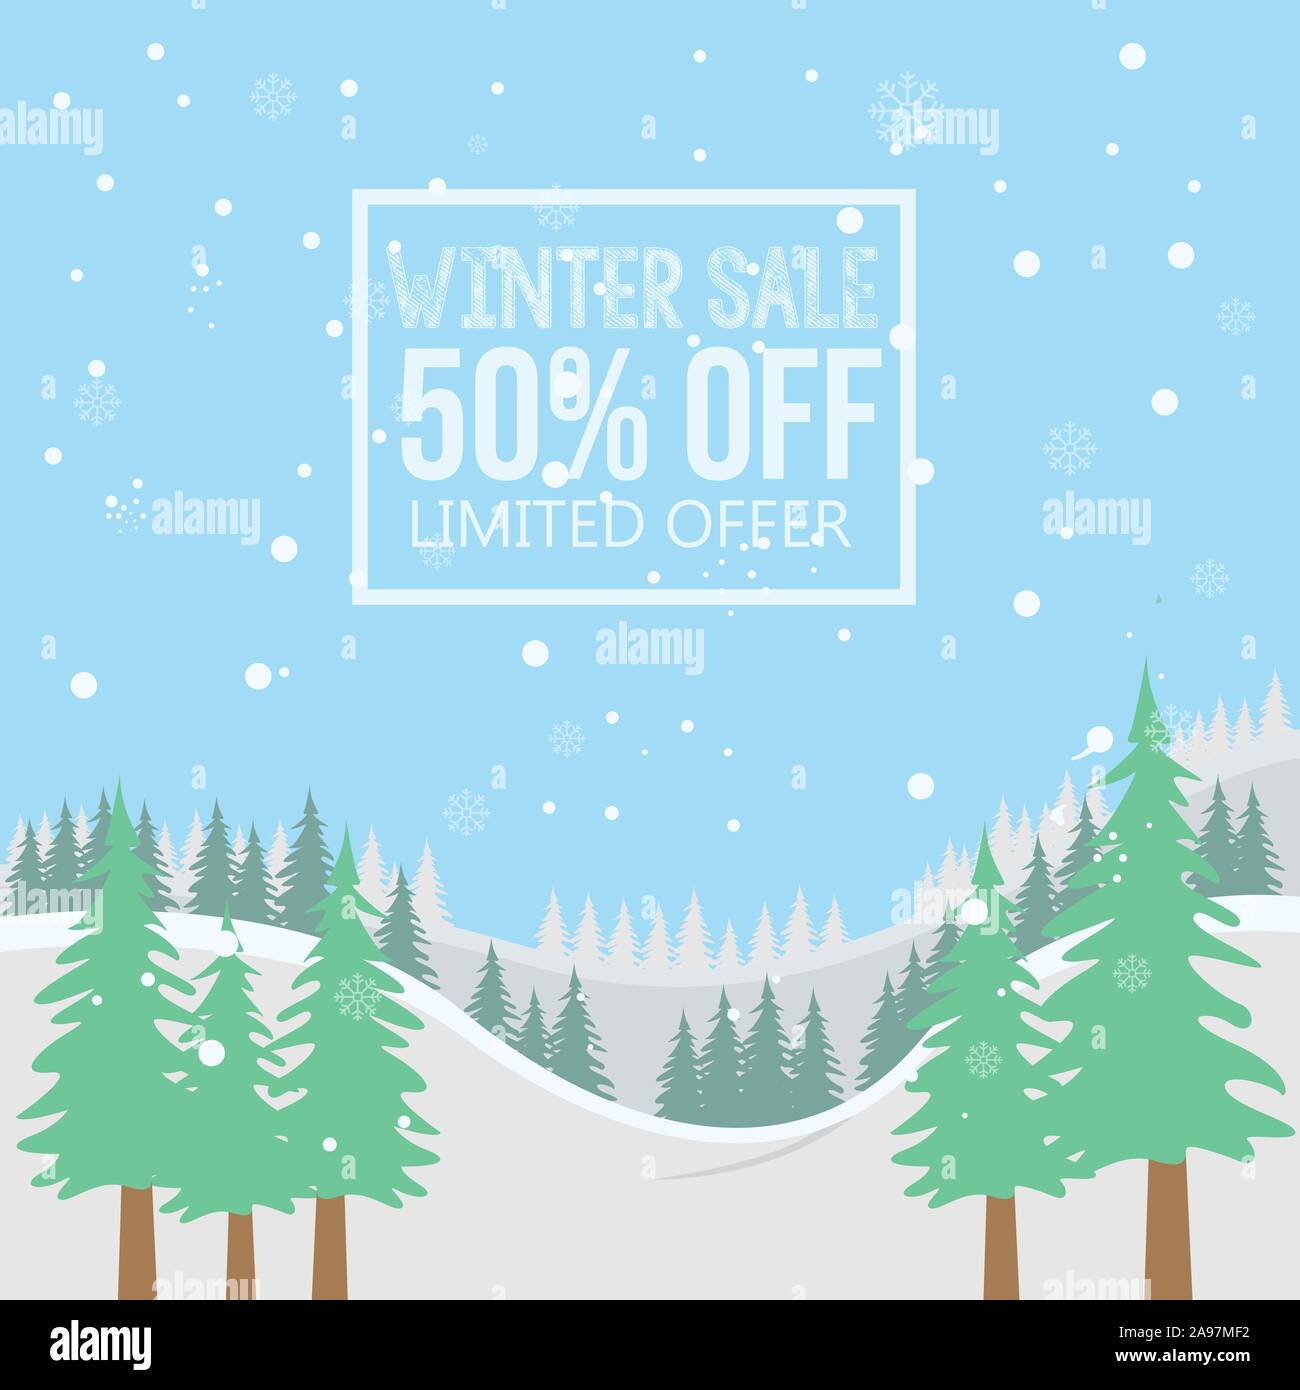 50 percent winter sale background. Winter sale landscape background with snowballs and snow Stock Vector